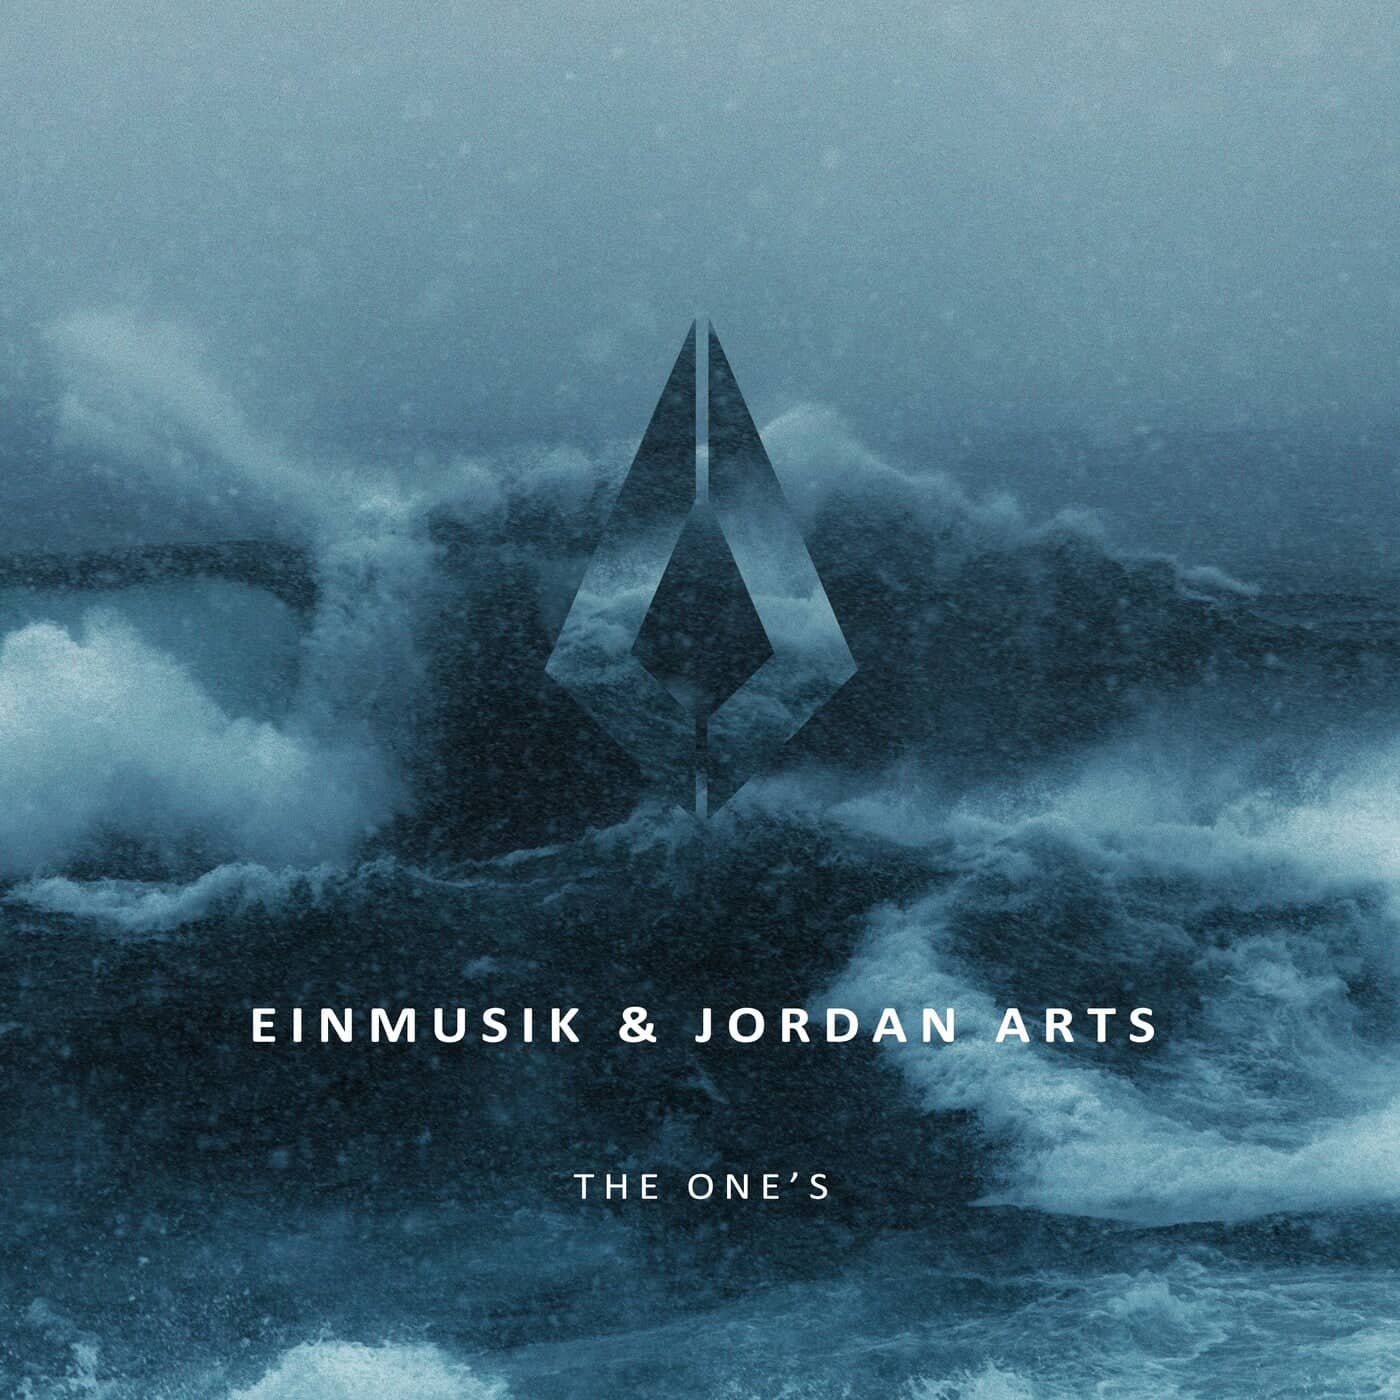 image cover: The One's by Einmusik, Jordan Arts on Purified Records